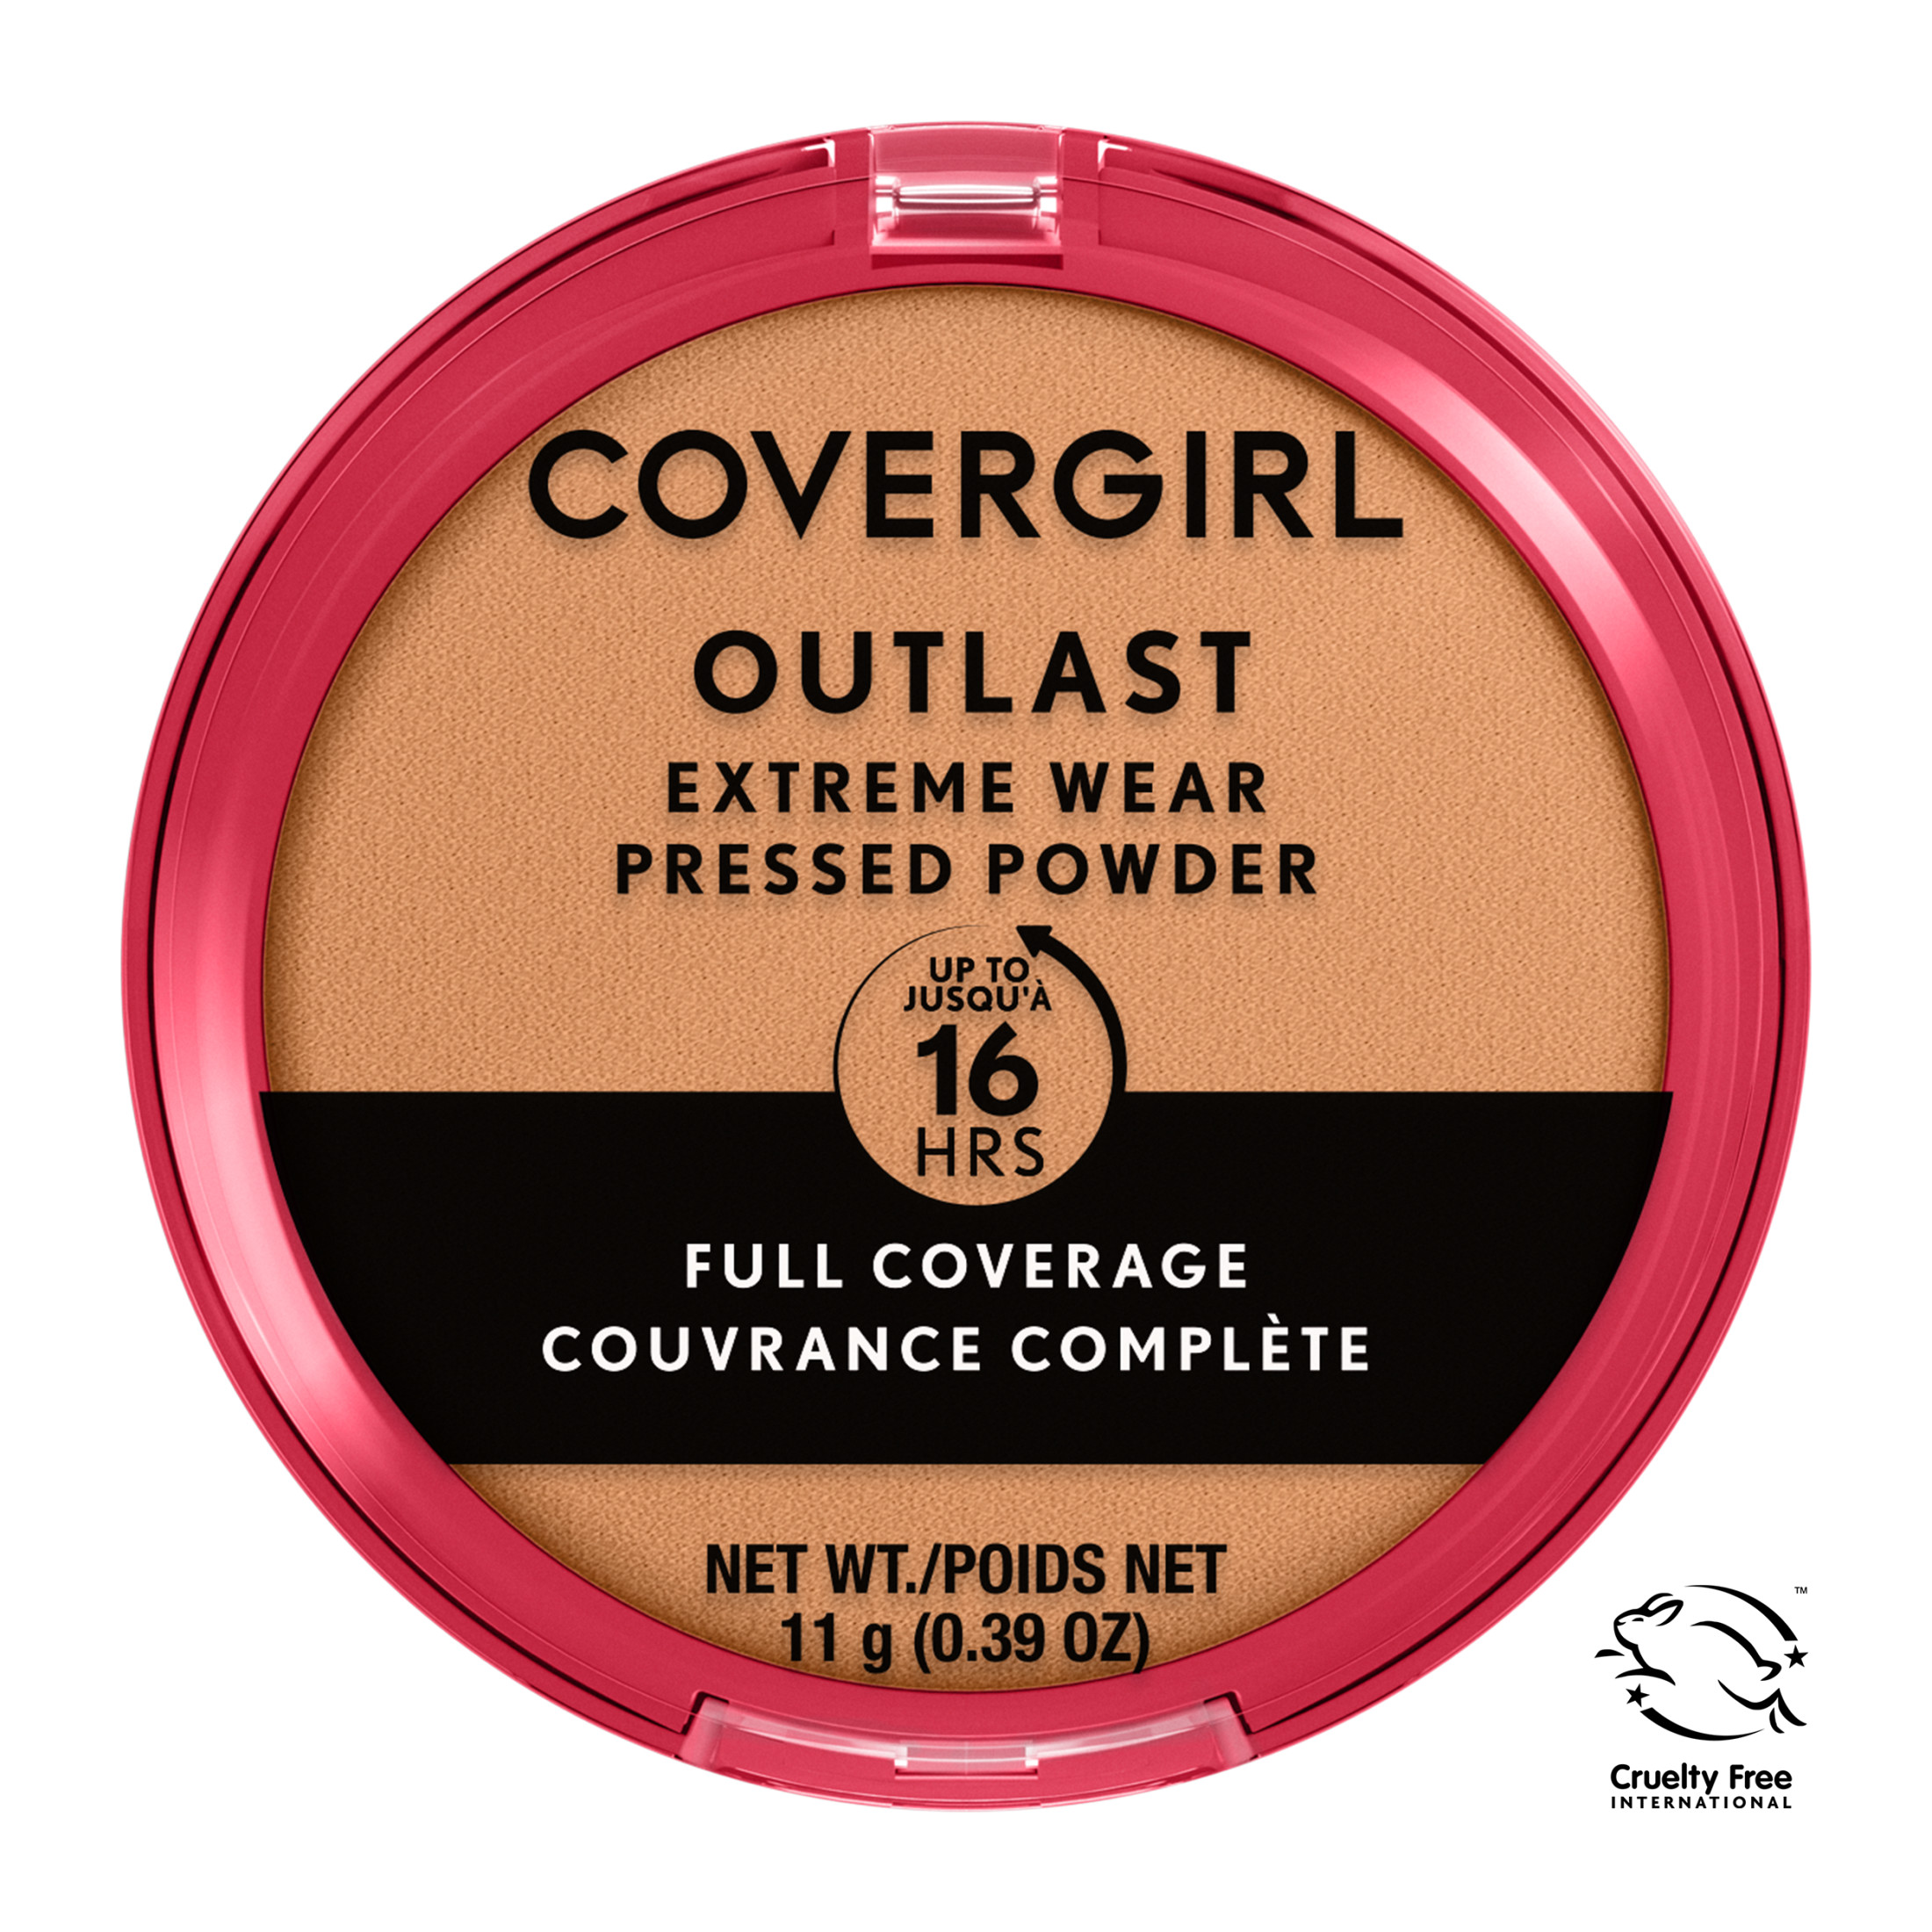 COVERGIRL Outlast Extreme Wear Pressed Powder, 862 Natural Tan, 0.38 oz, Full Coverage - image 1 of 12